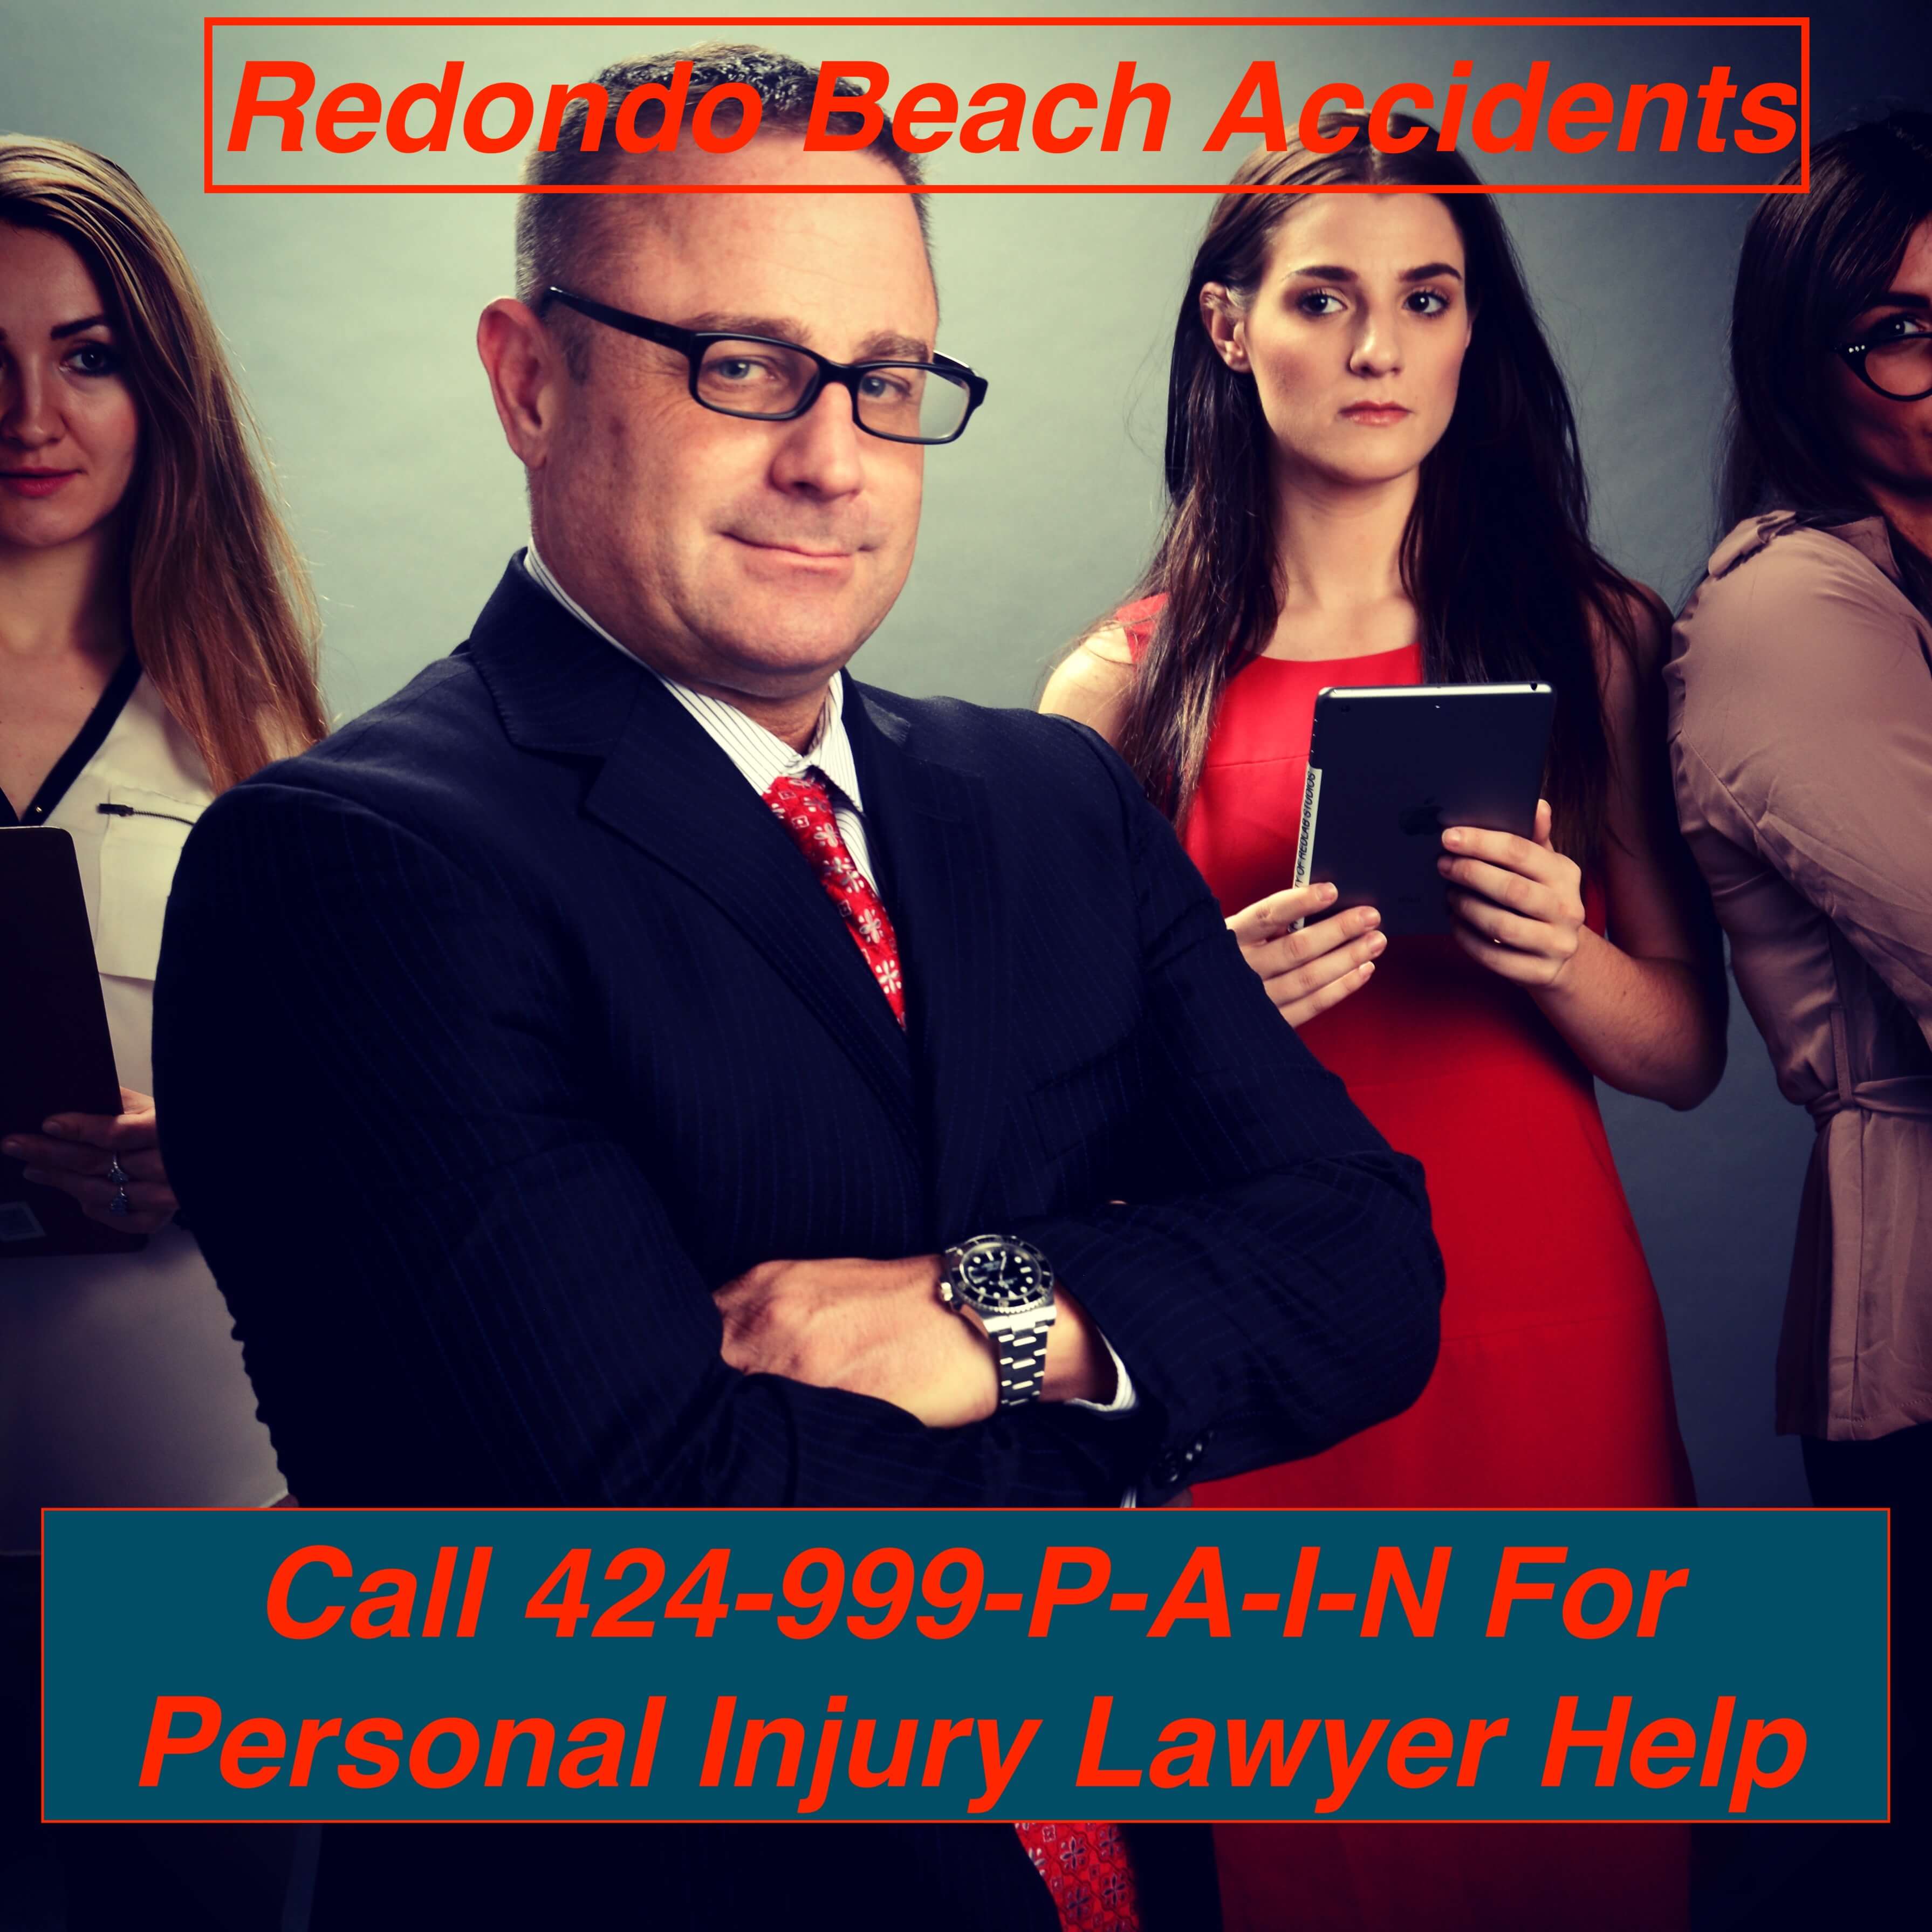 Redondo Beach Bicycle Accident Lawyers